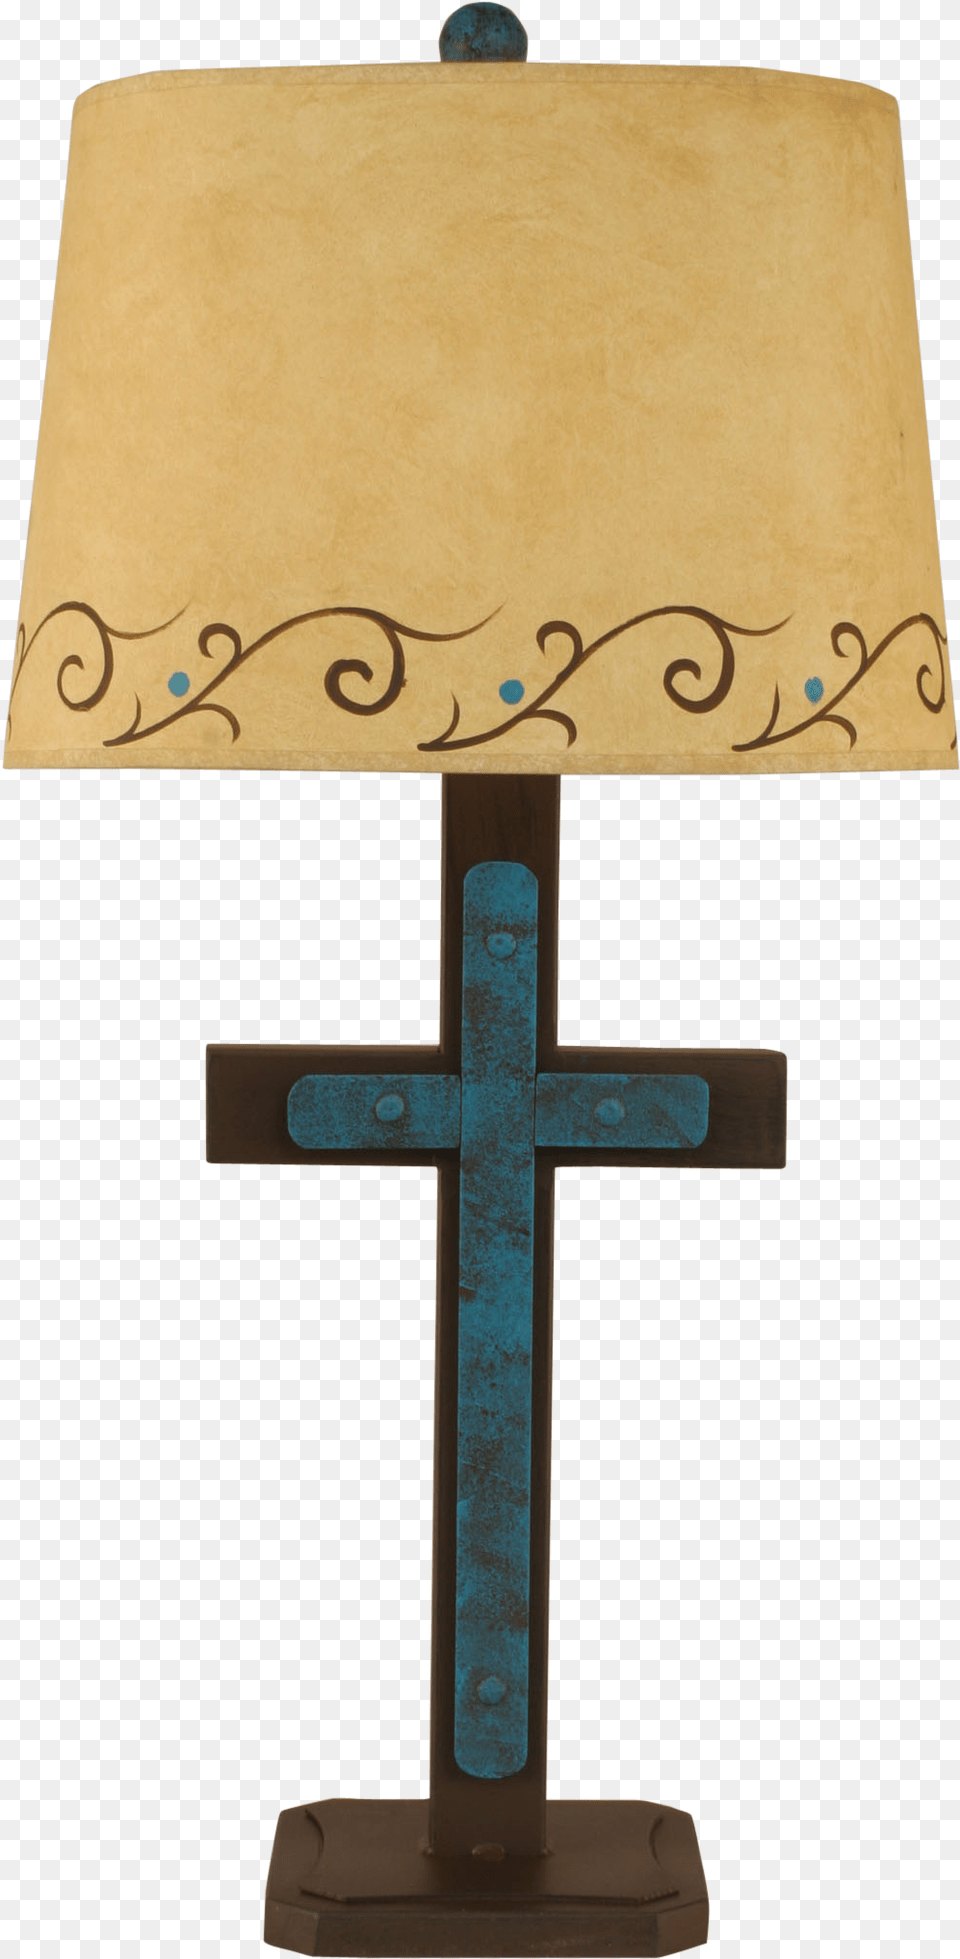 Jadebrown Cross Table Lamp W Scroll Accent Lampshade, Table Lamp, Symbol Free Png